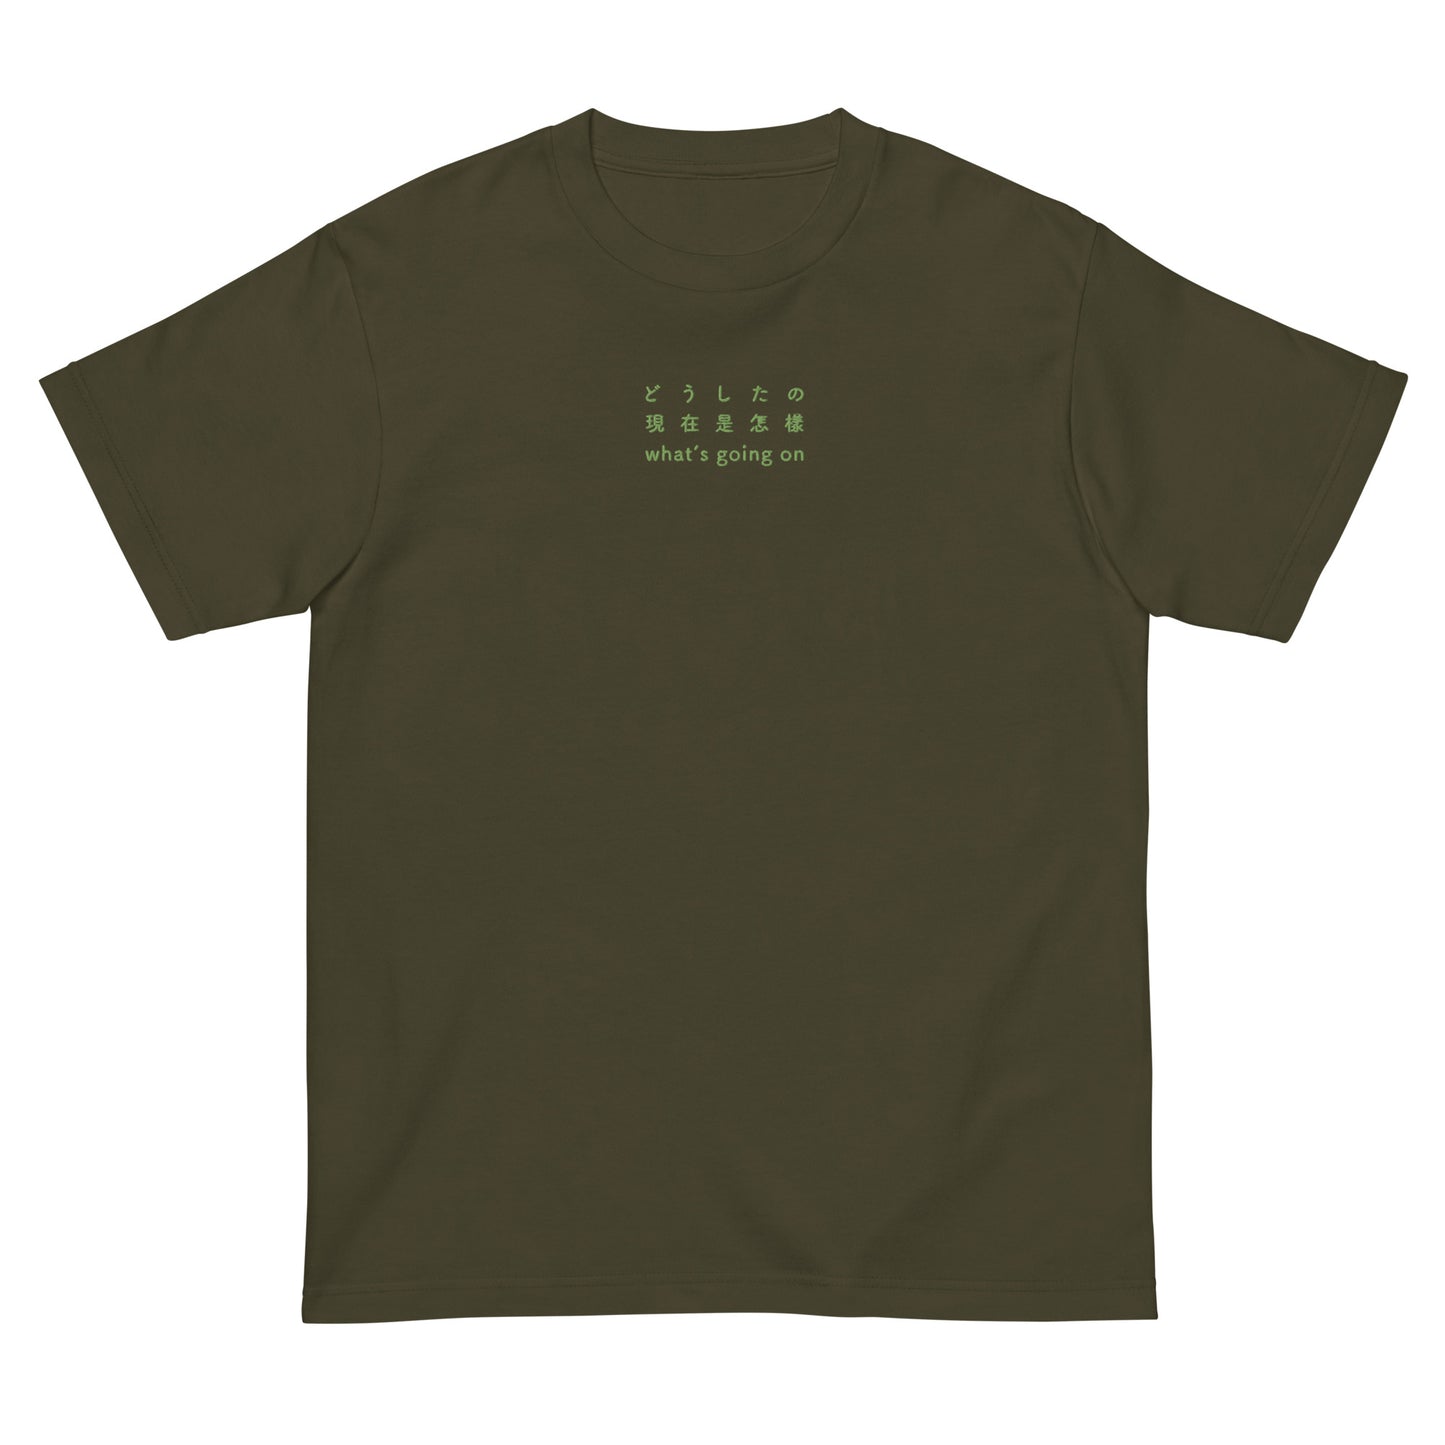 Green High Quality Tee - Front Design with an Green Embroidery "What's going on" in Japanese,Chinese and English